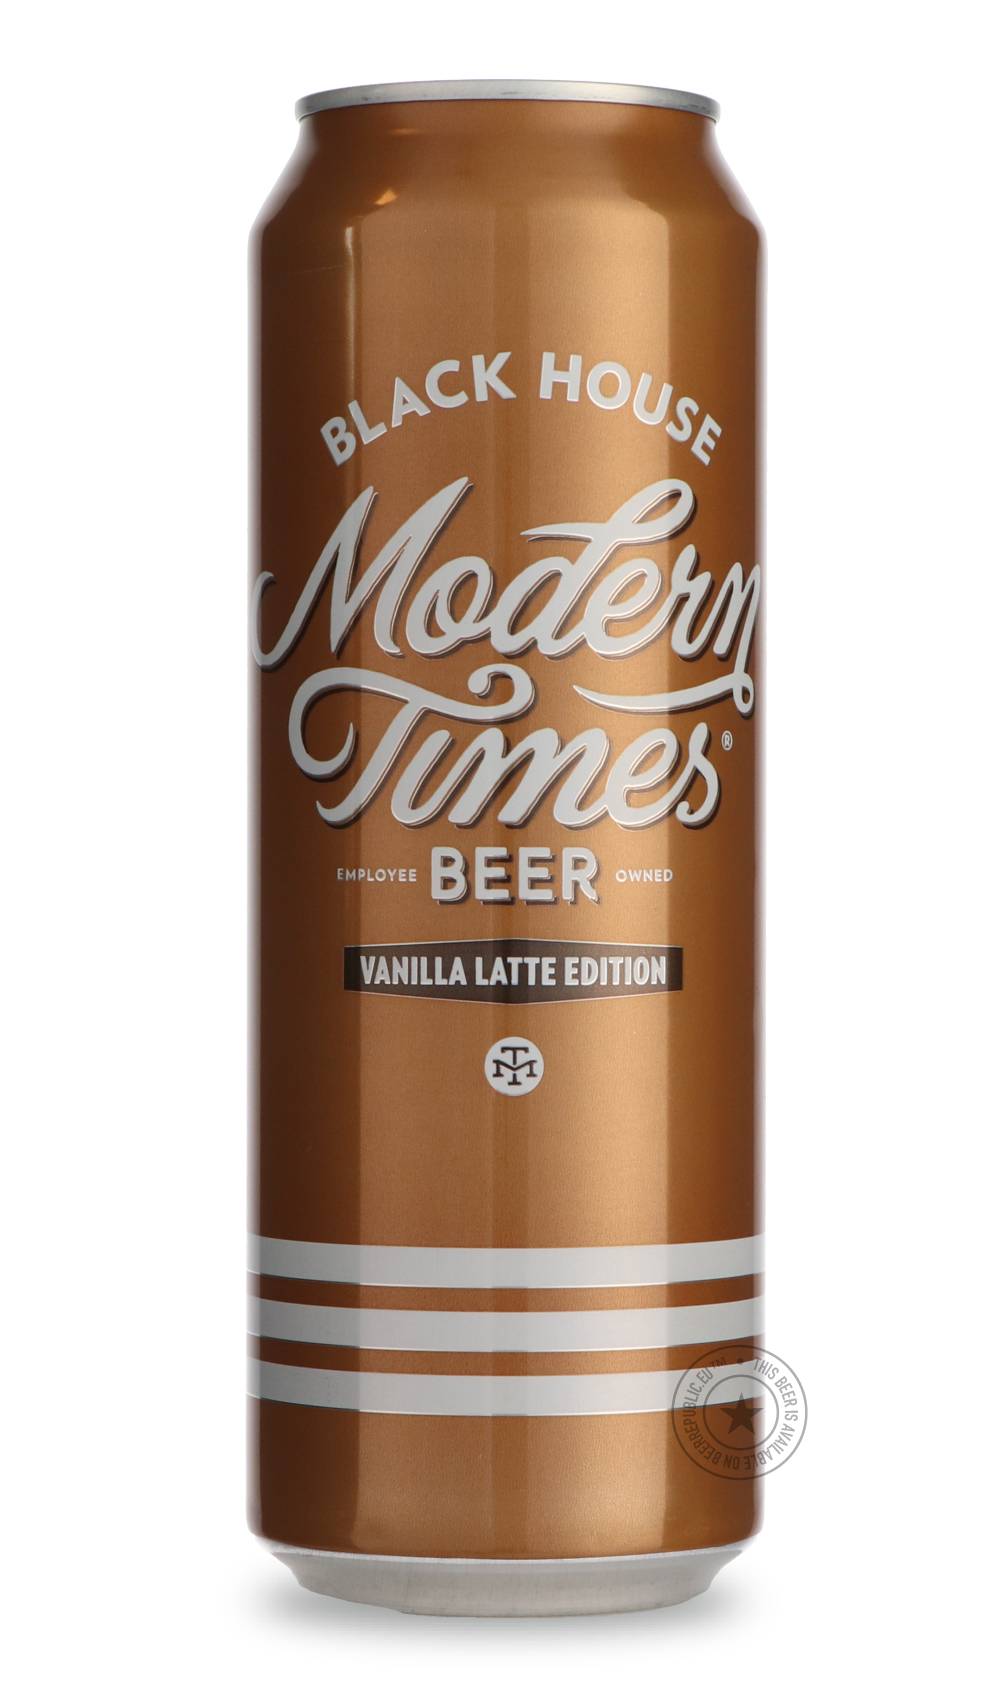 -Modern Times- Black House Vanilla Latte Edition-Stout & Porter- Only @ Beer Republic - The best online beer store for American & Canadian craft beer - Buy beer online from the USA and Canada - Bier online kopen - Amerikaans bier kopen - Craft beer store - Craft beer kopen - Amerikanisch bier kaufen - Bier online kaufen - Acheter biere online - IPA - Stout - Porter - New England IPA - Hazy IPA - Imperial Stout - Barrel Aged - Barrel Aged Imperial Stout - Brown - Dark beer - Blond - Blonde - Pilsner - Lager 